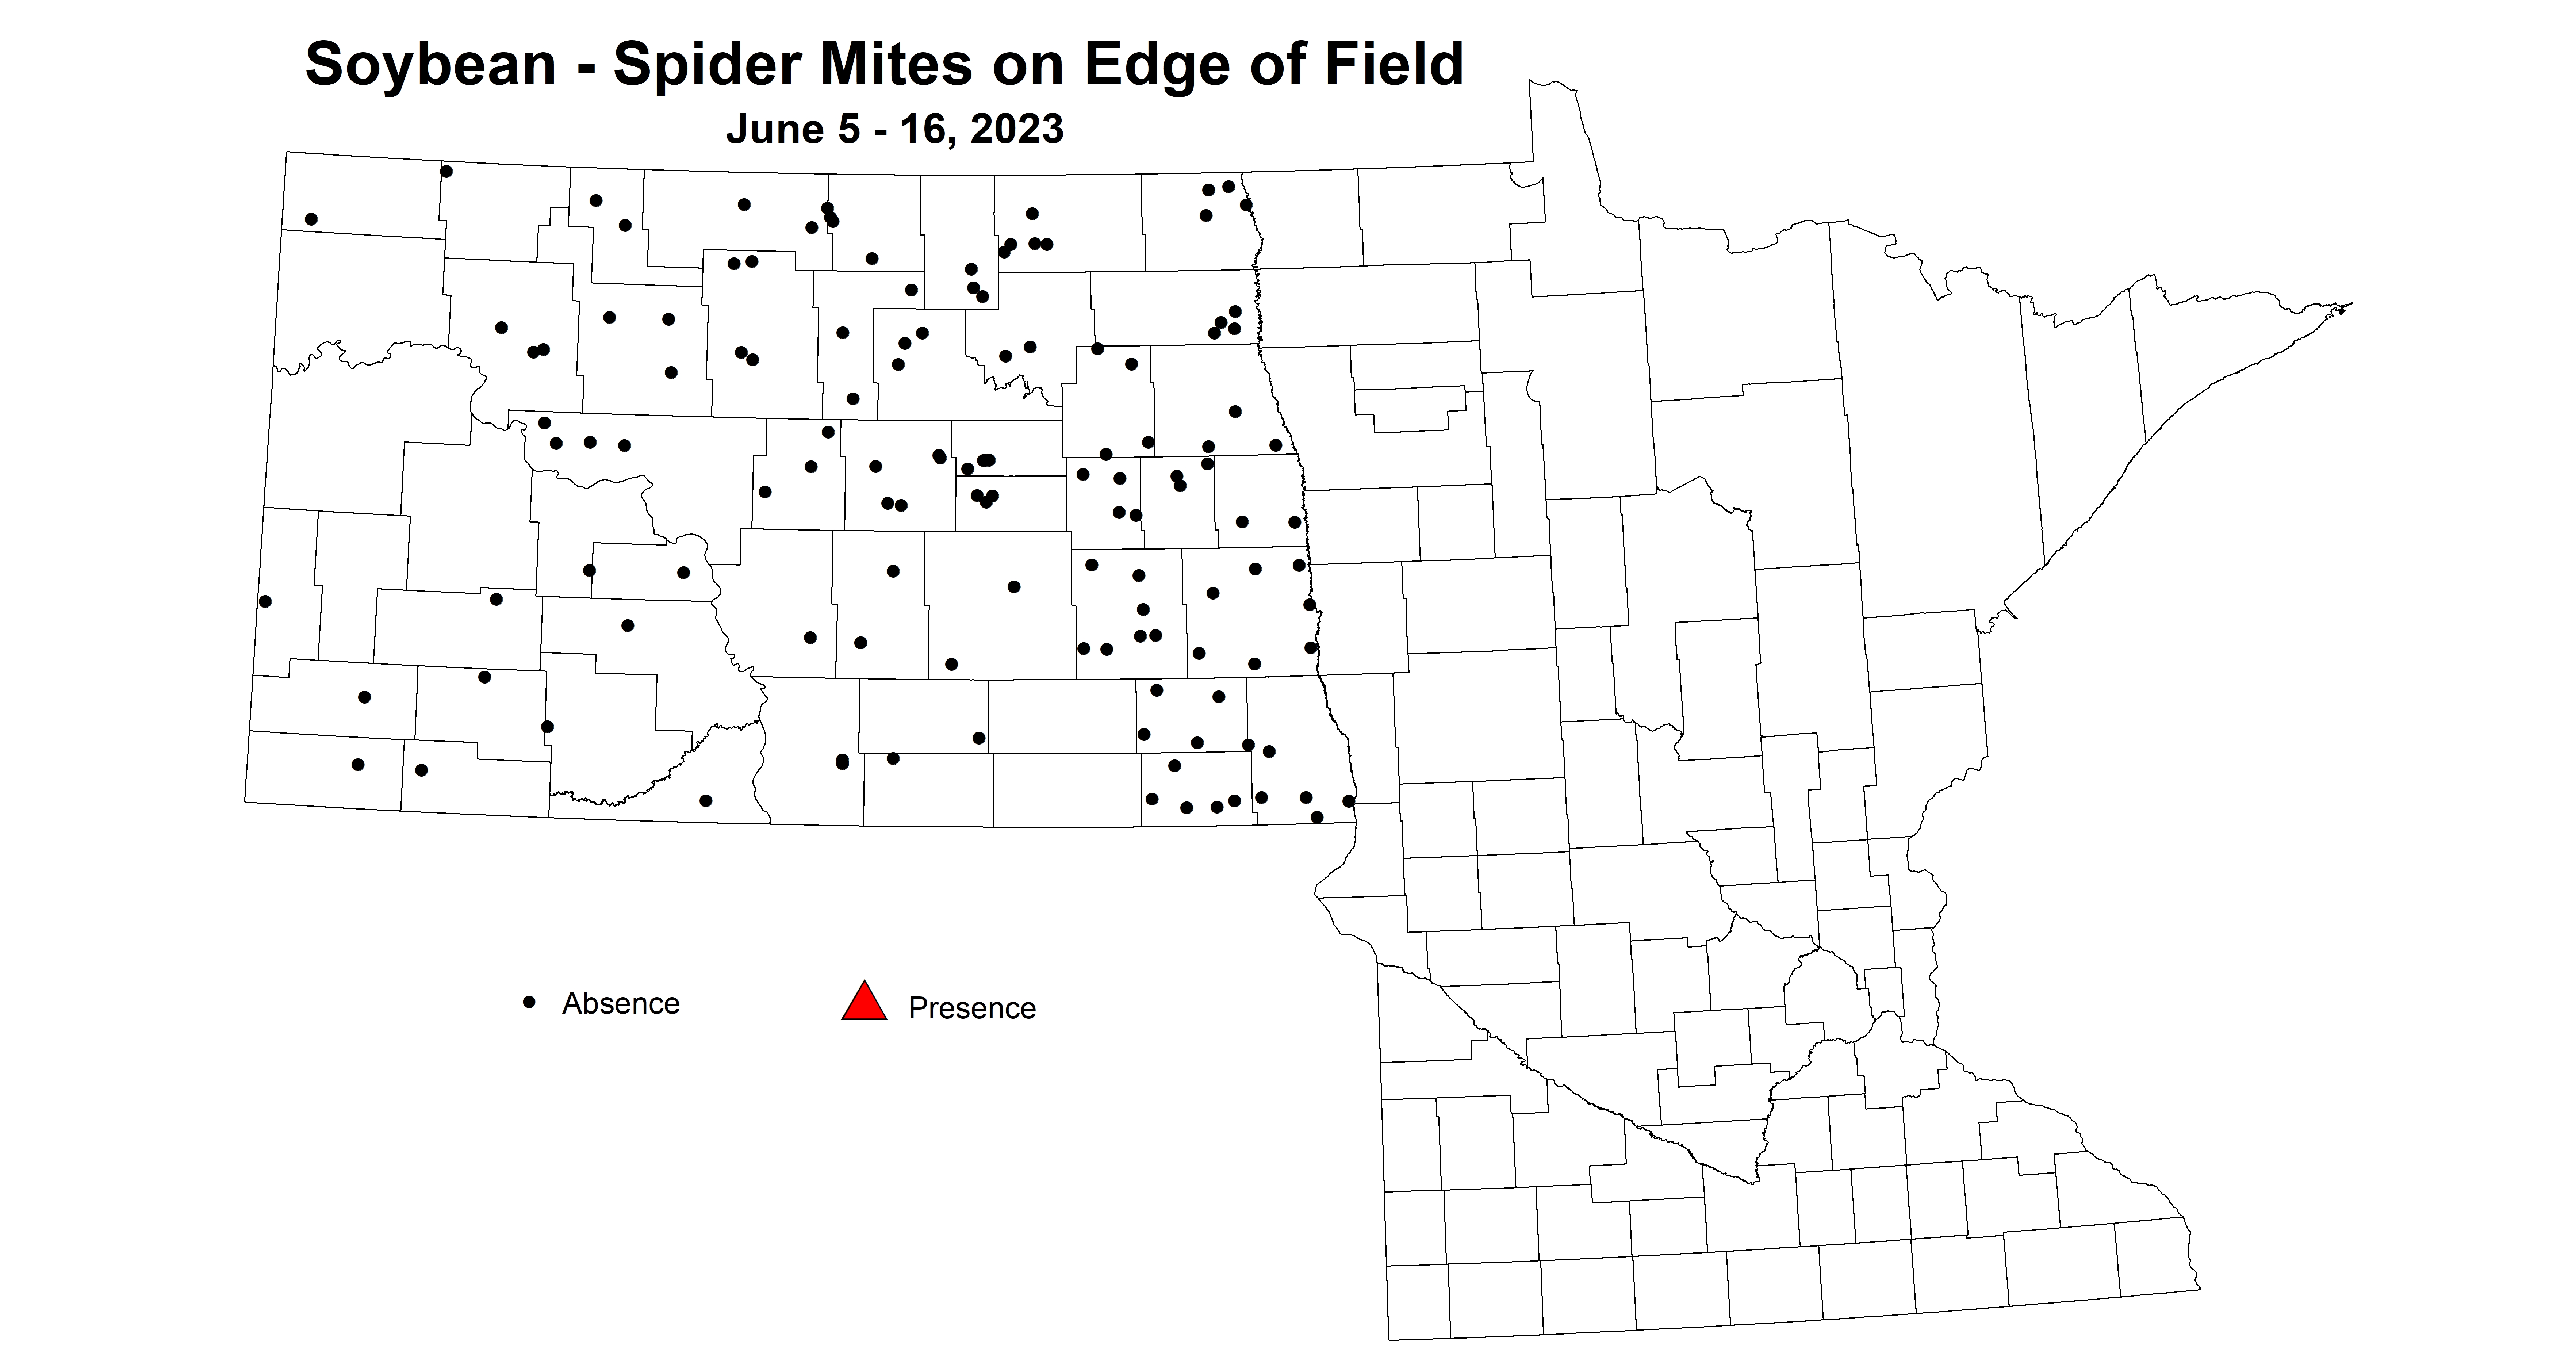 soybean spider mites on edge of field June 5-16 2023